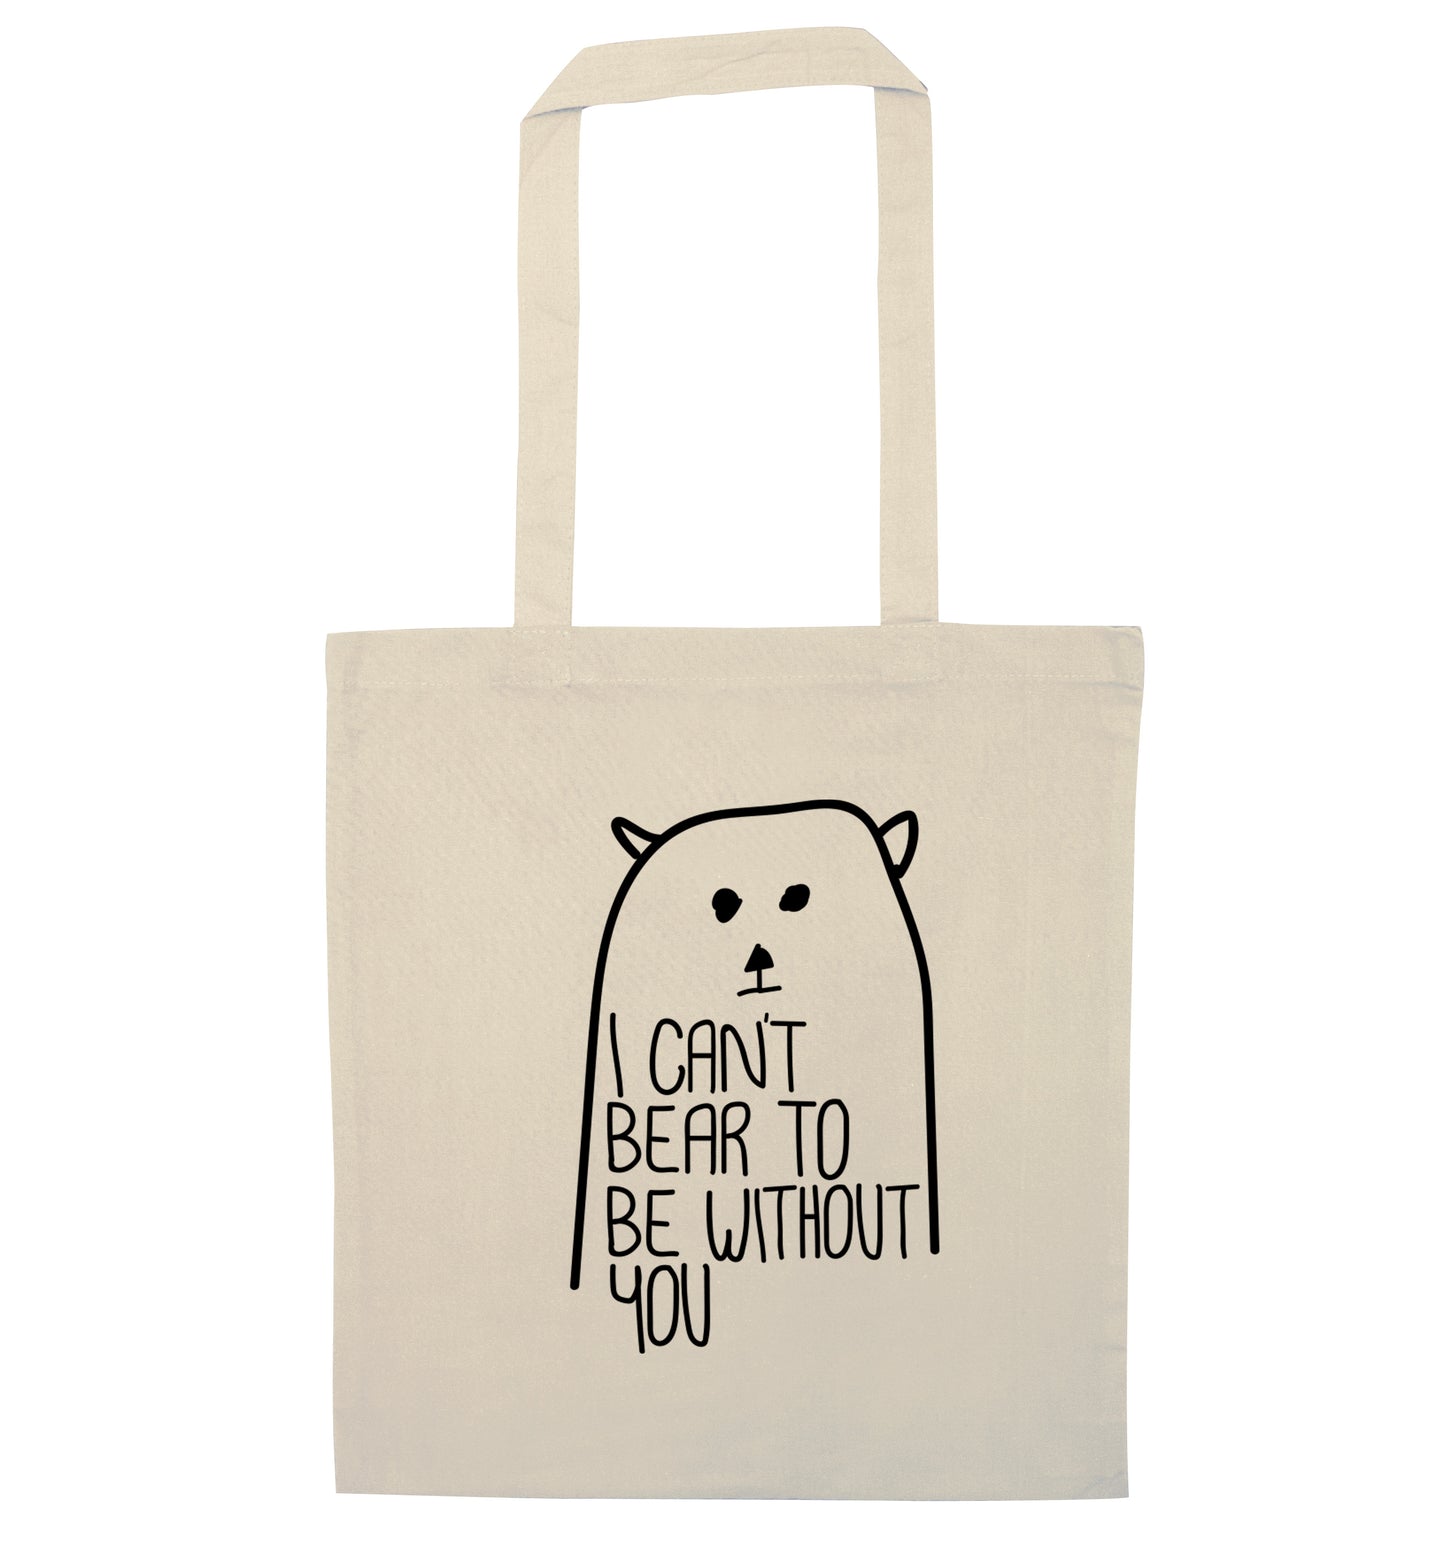 I can't bear to be without you natural tote bag